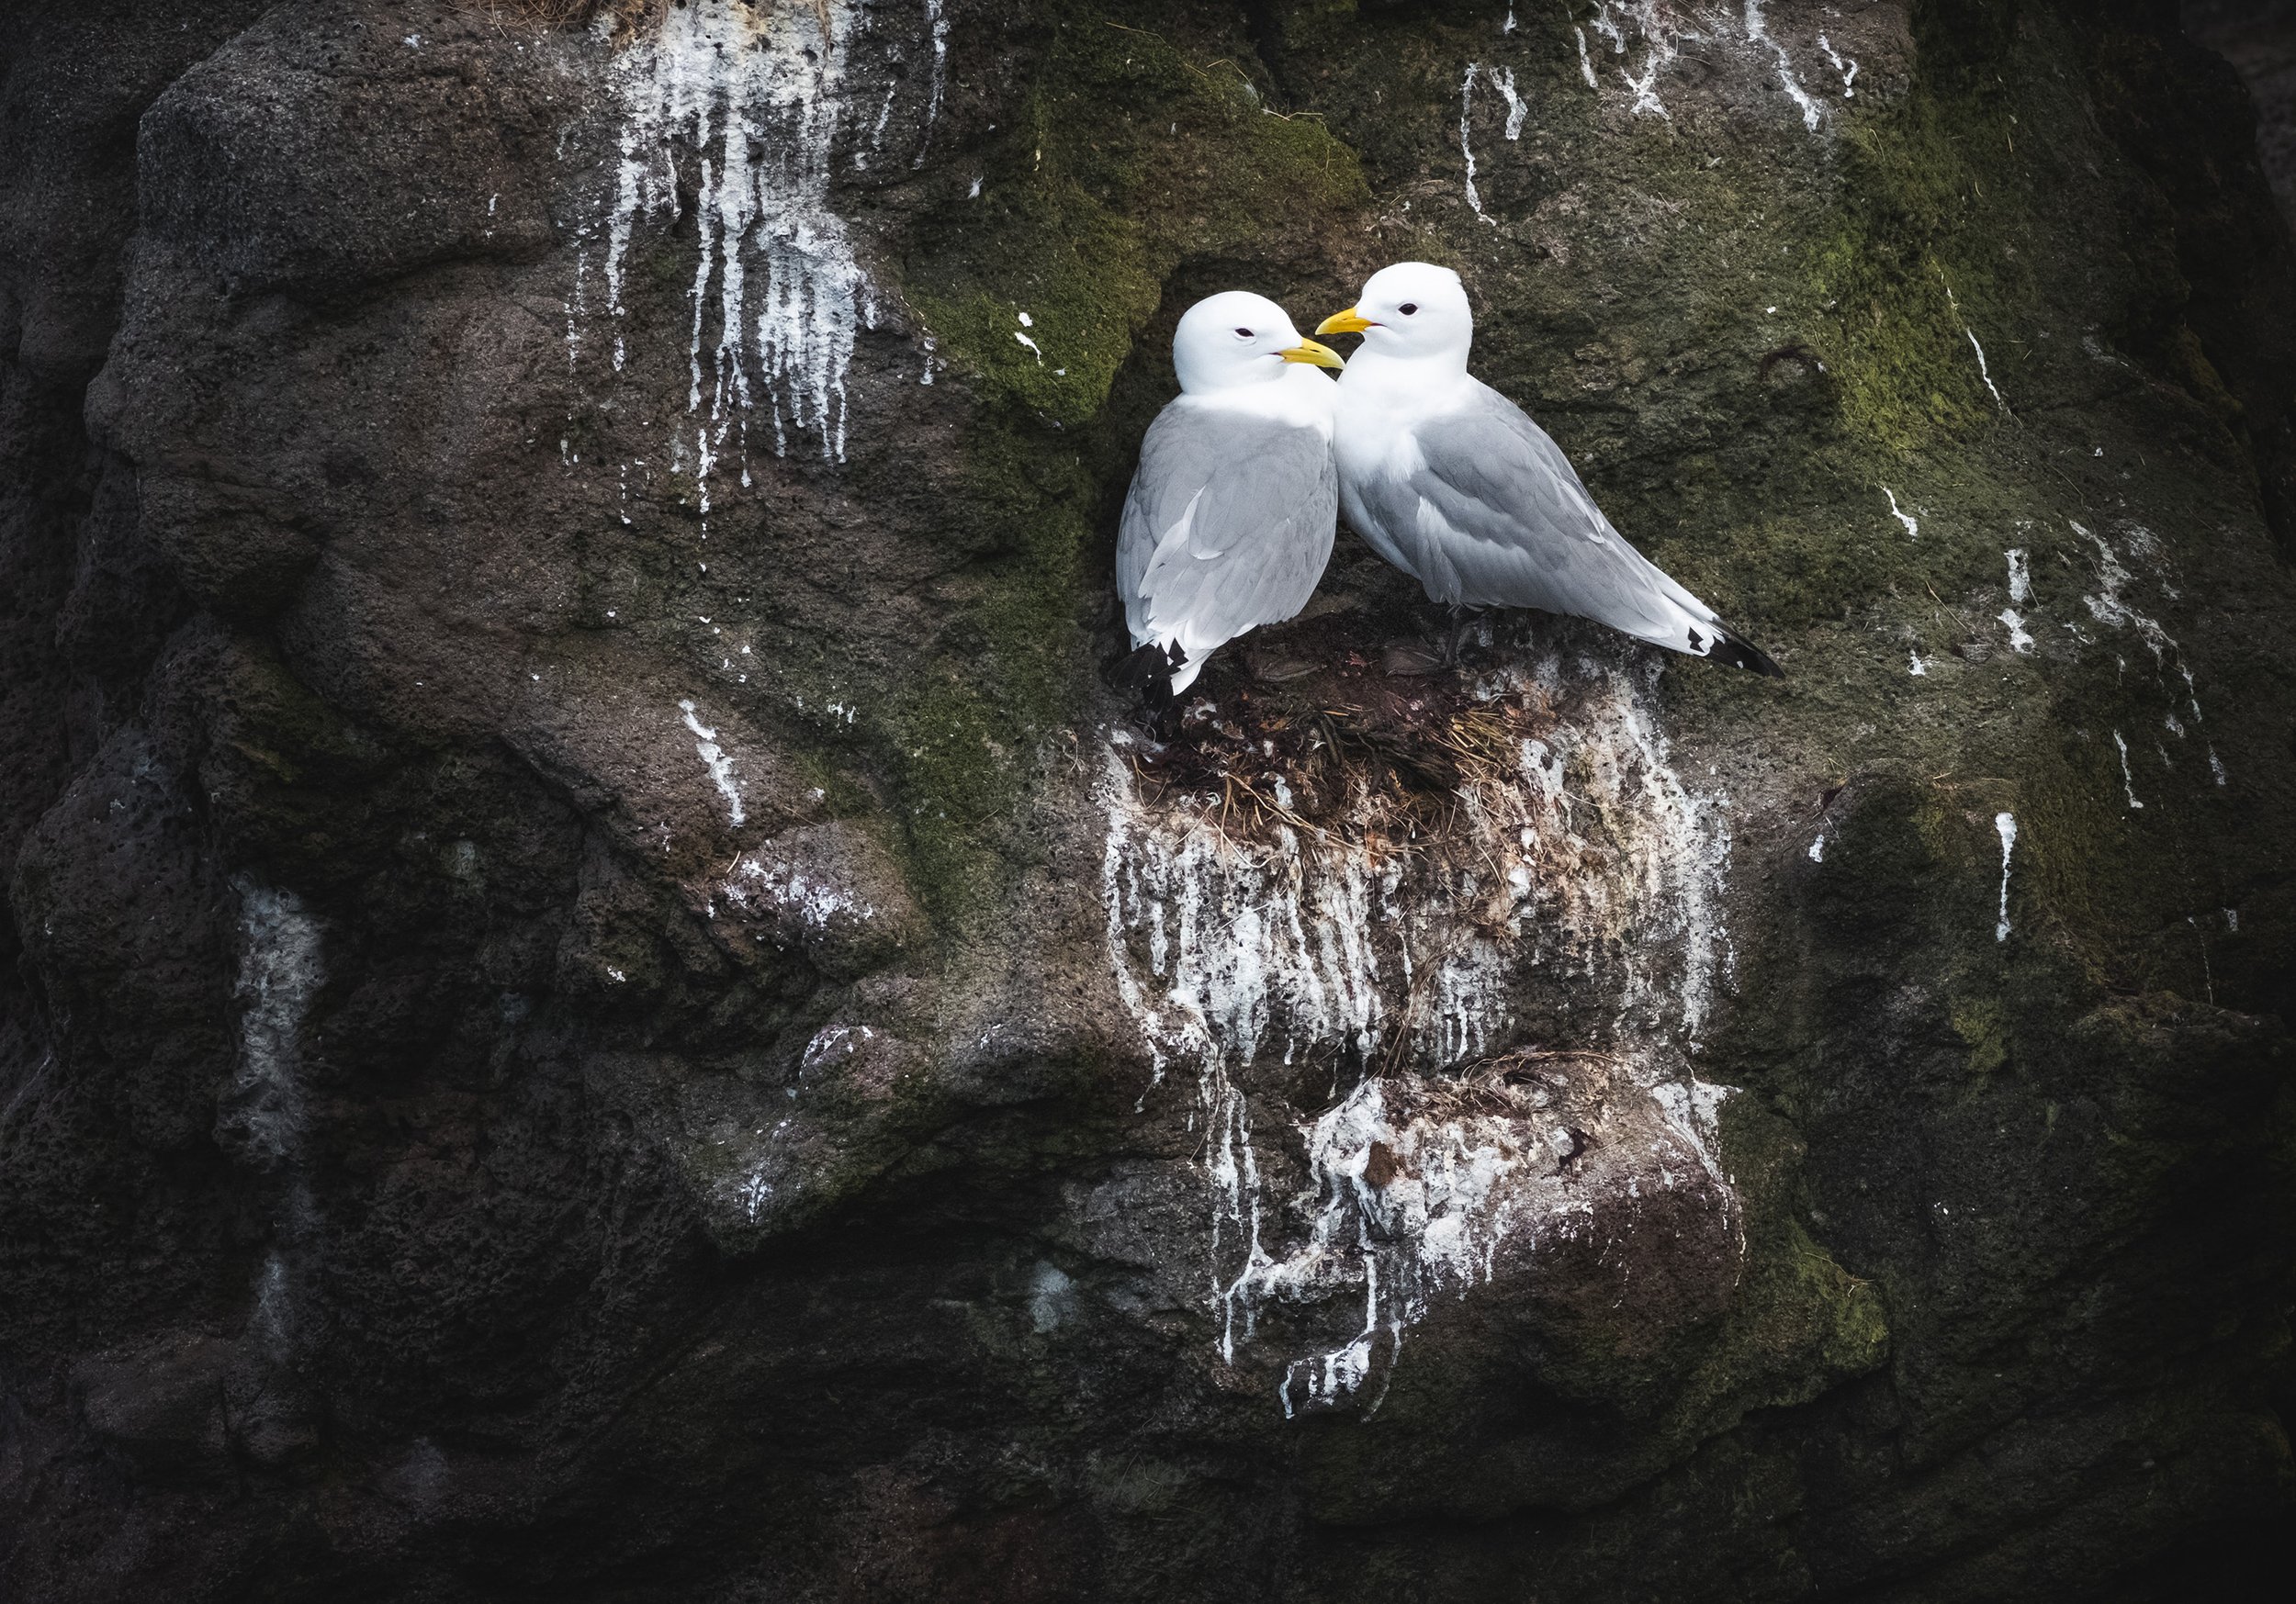  A couple of kittiwakes in their nest in a bird cliff. ©Nico Schmid 